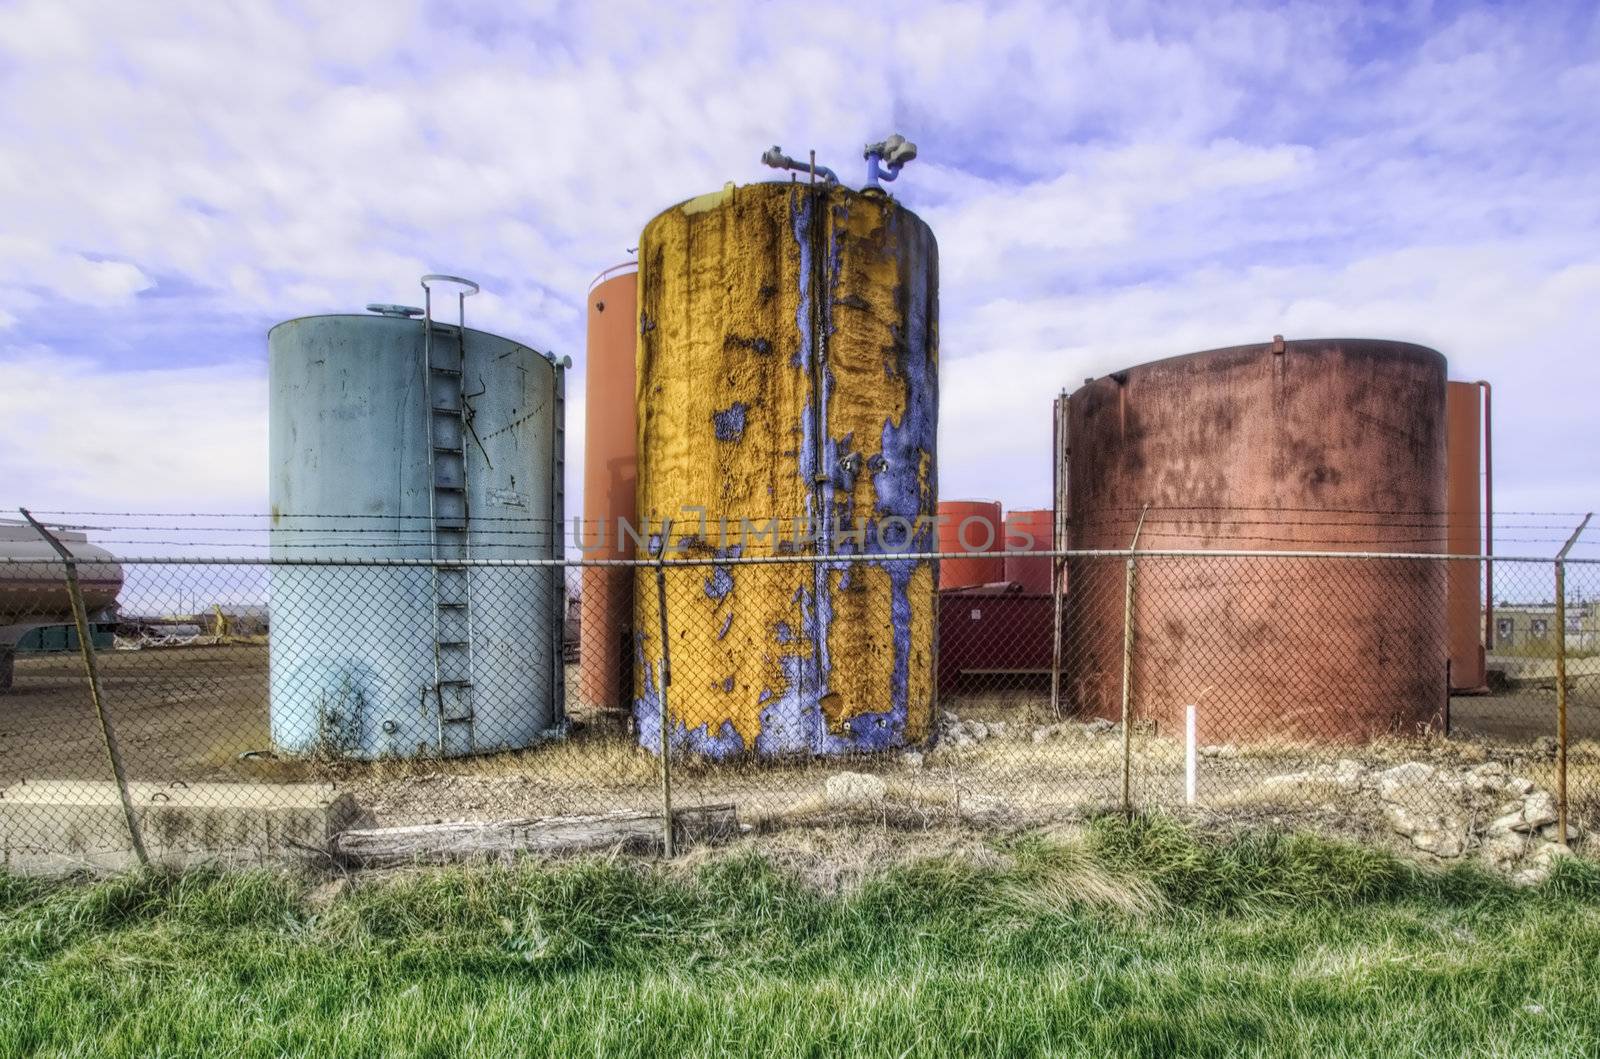 A rusty, discarded container in the industrial section of Stettler, Alberta, Canada.